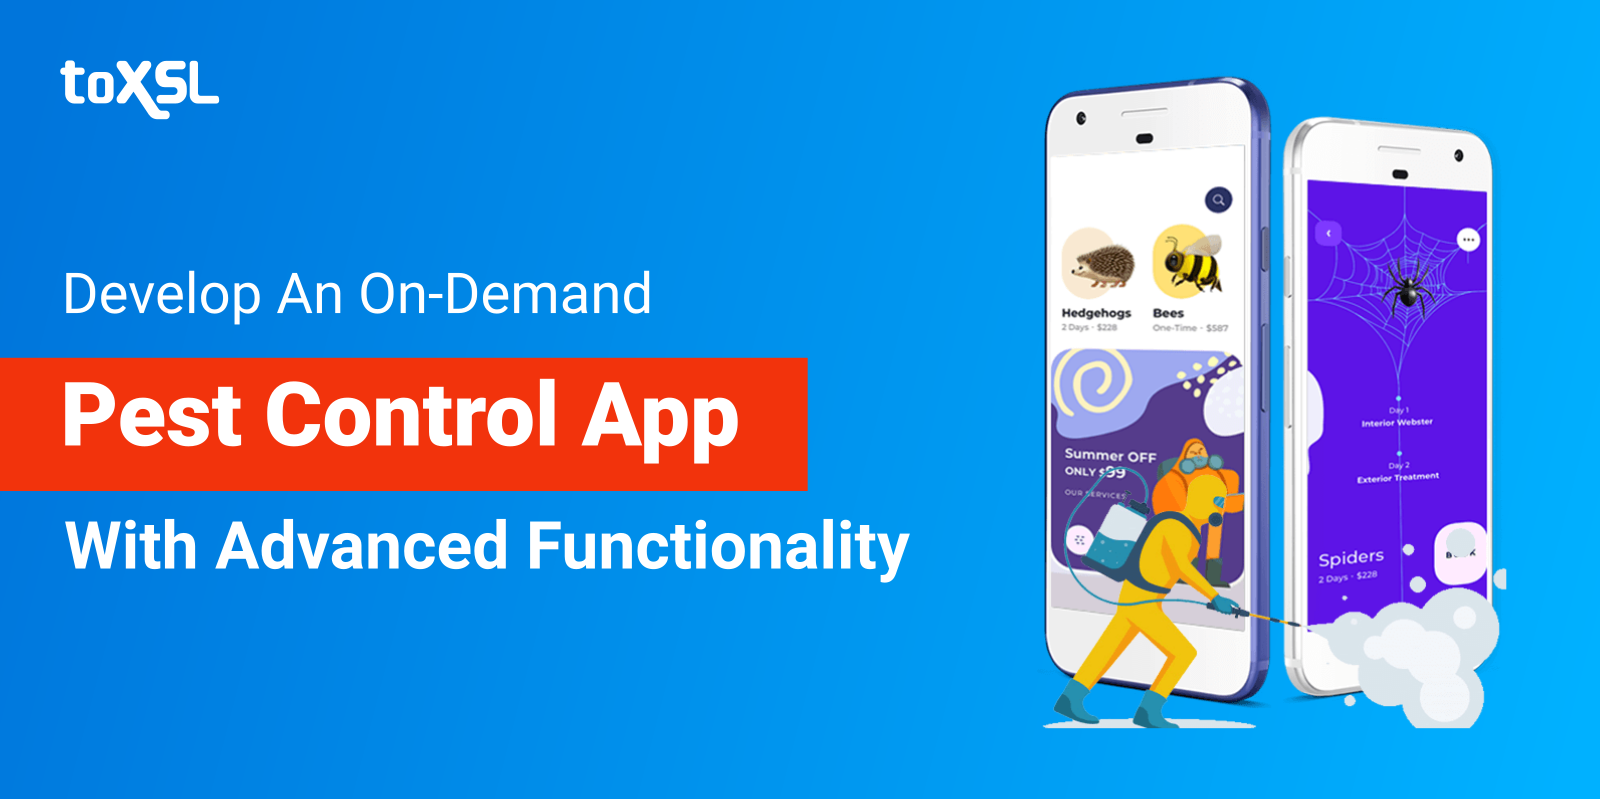 How To Develop An On-Demand Pest Control App with Advanced Functionality?